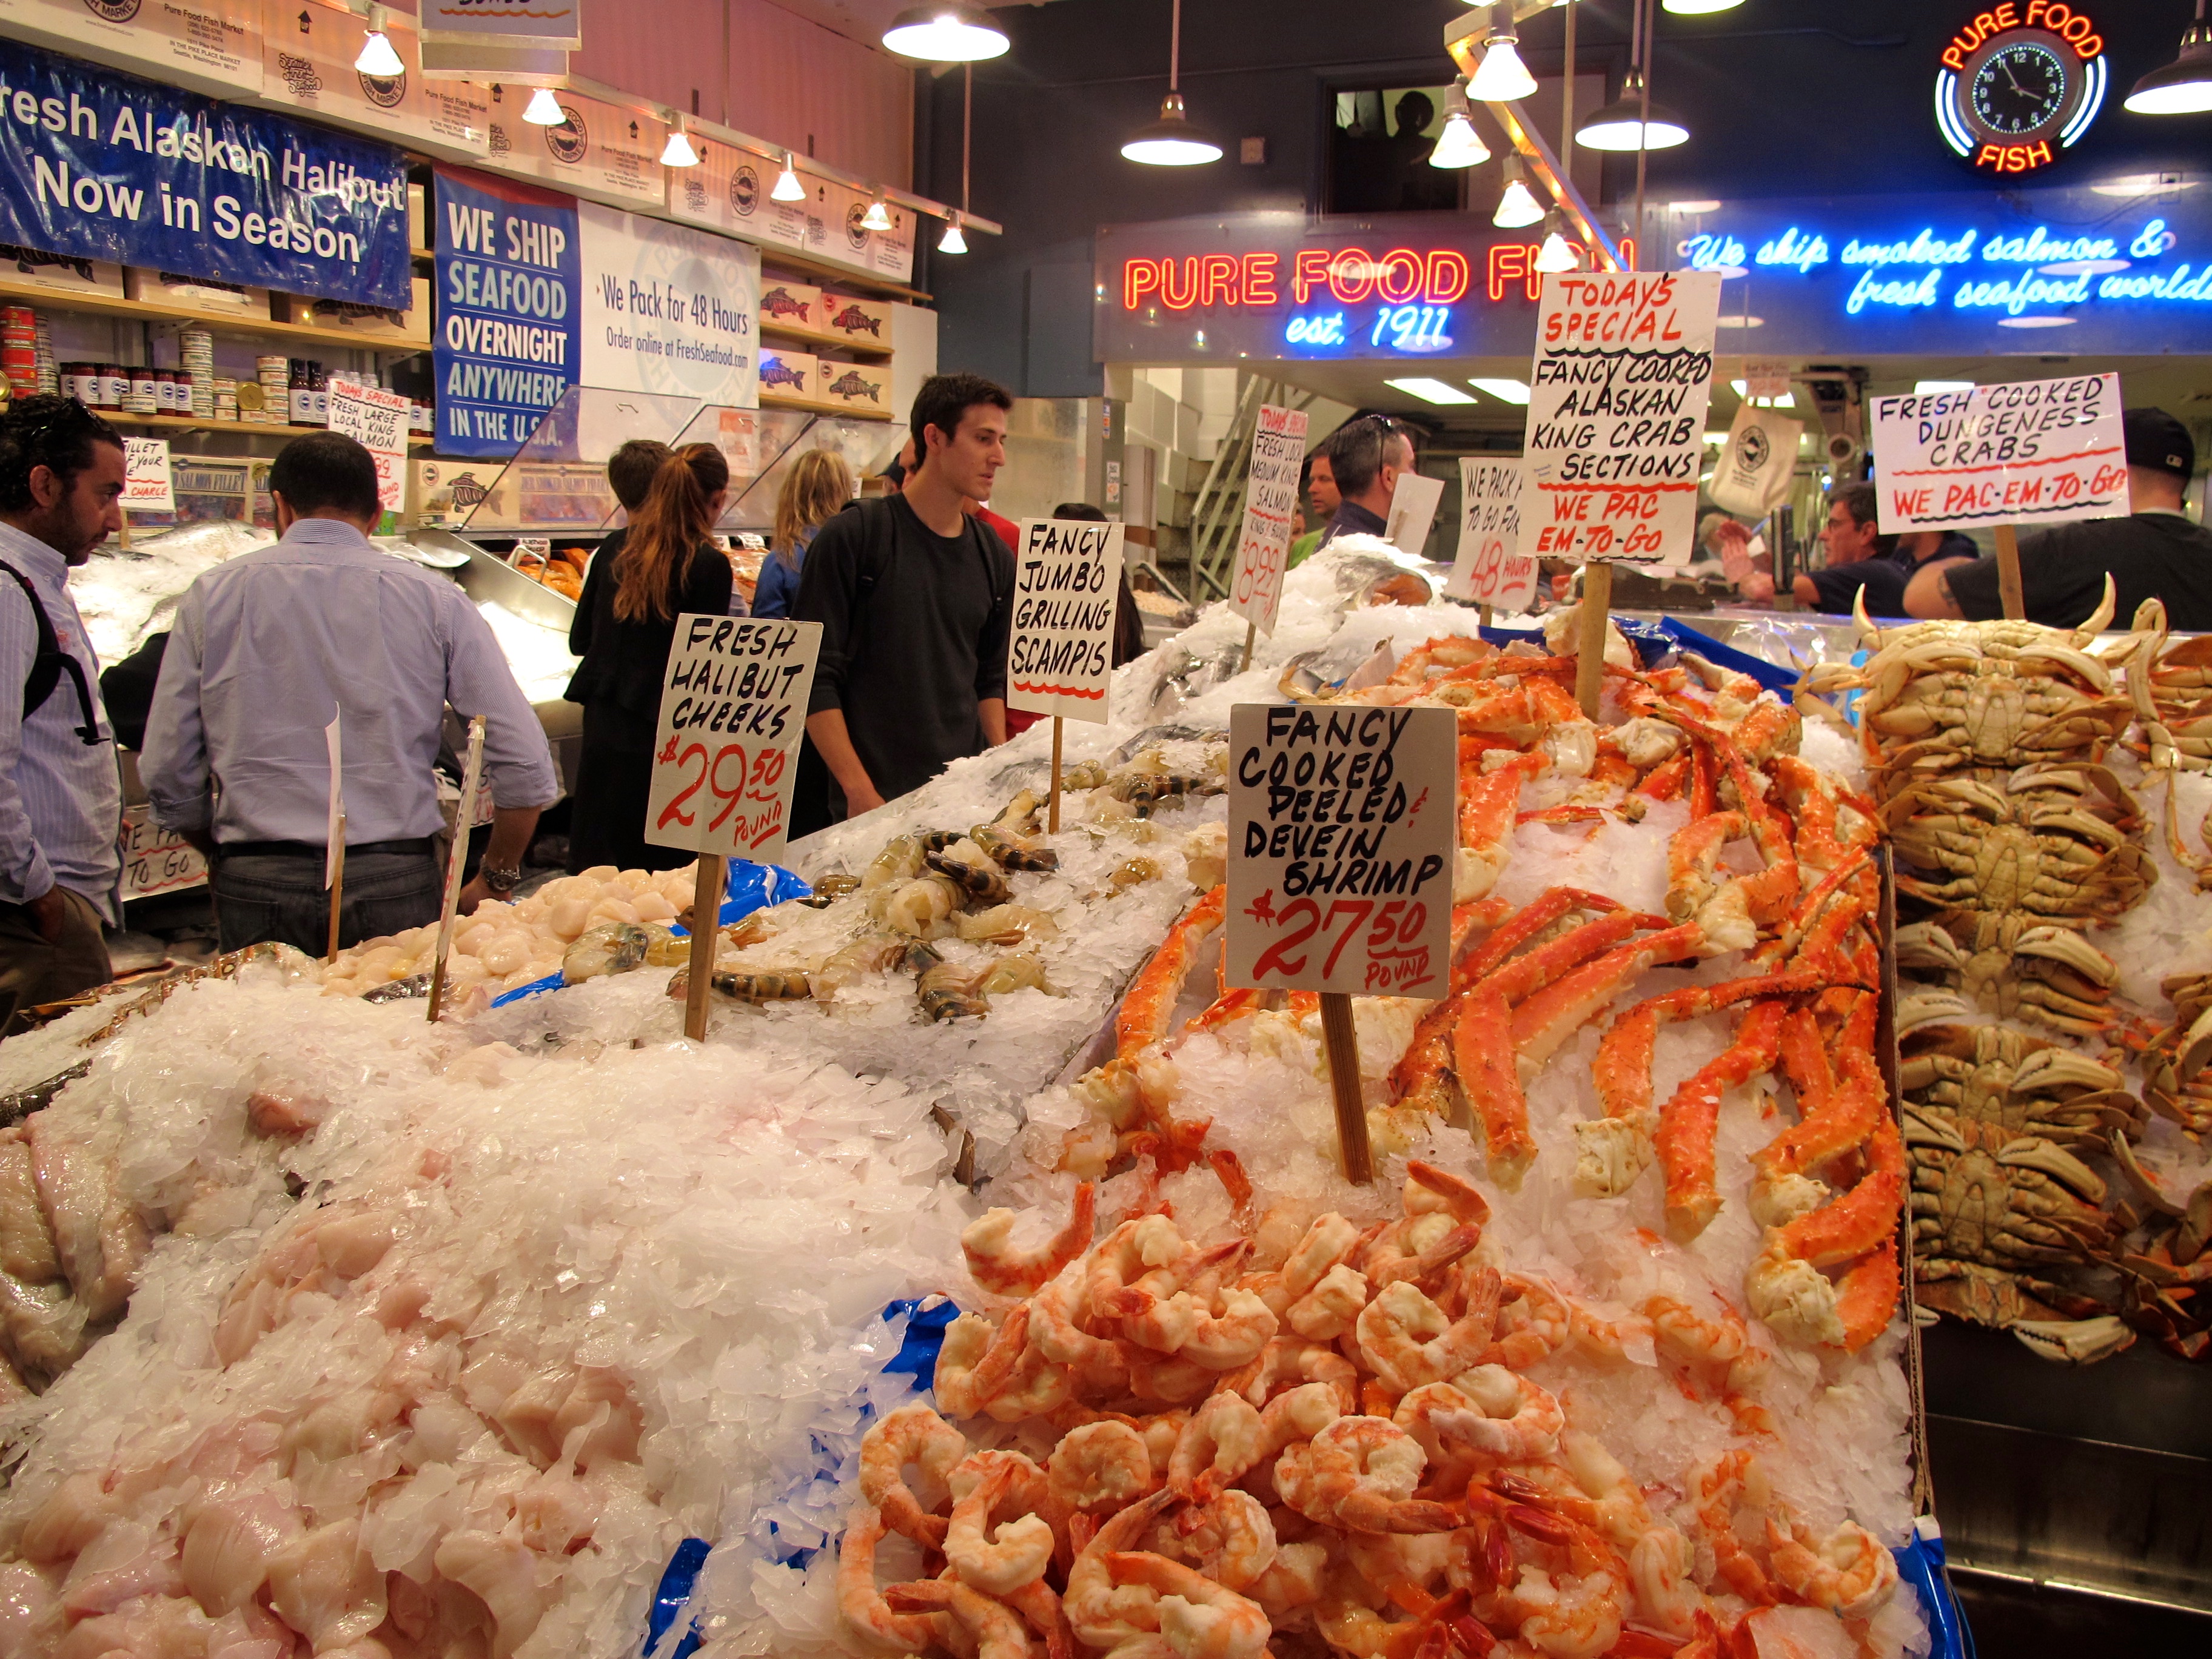 LOOK OUT! A Fish Fight could erupt at any minute at the Pike Place Market. Photo by Marla Norman.